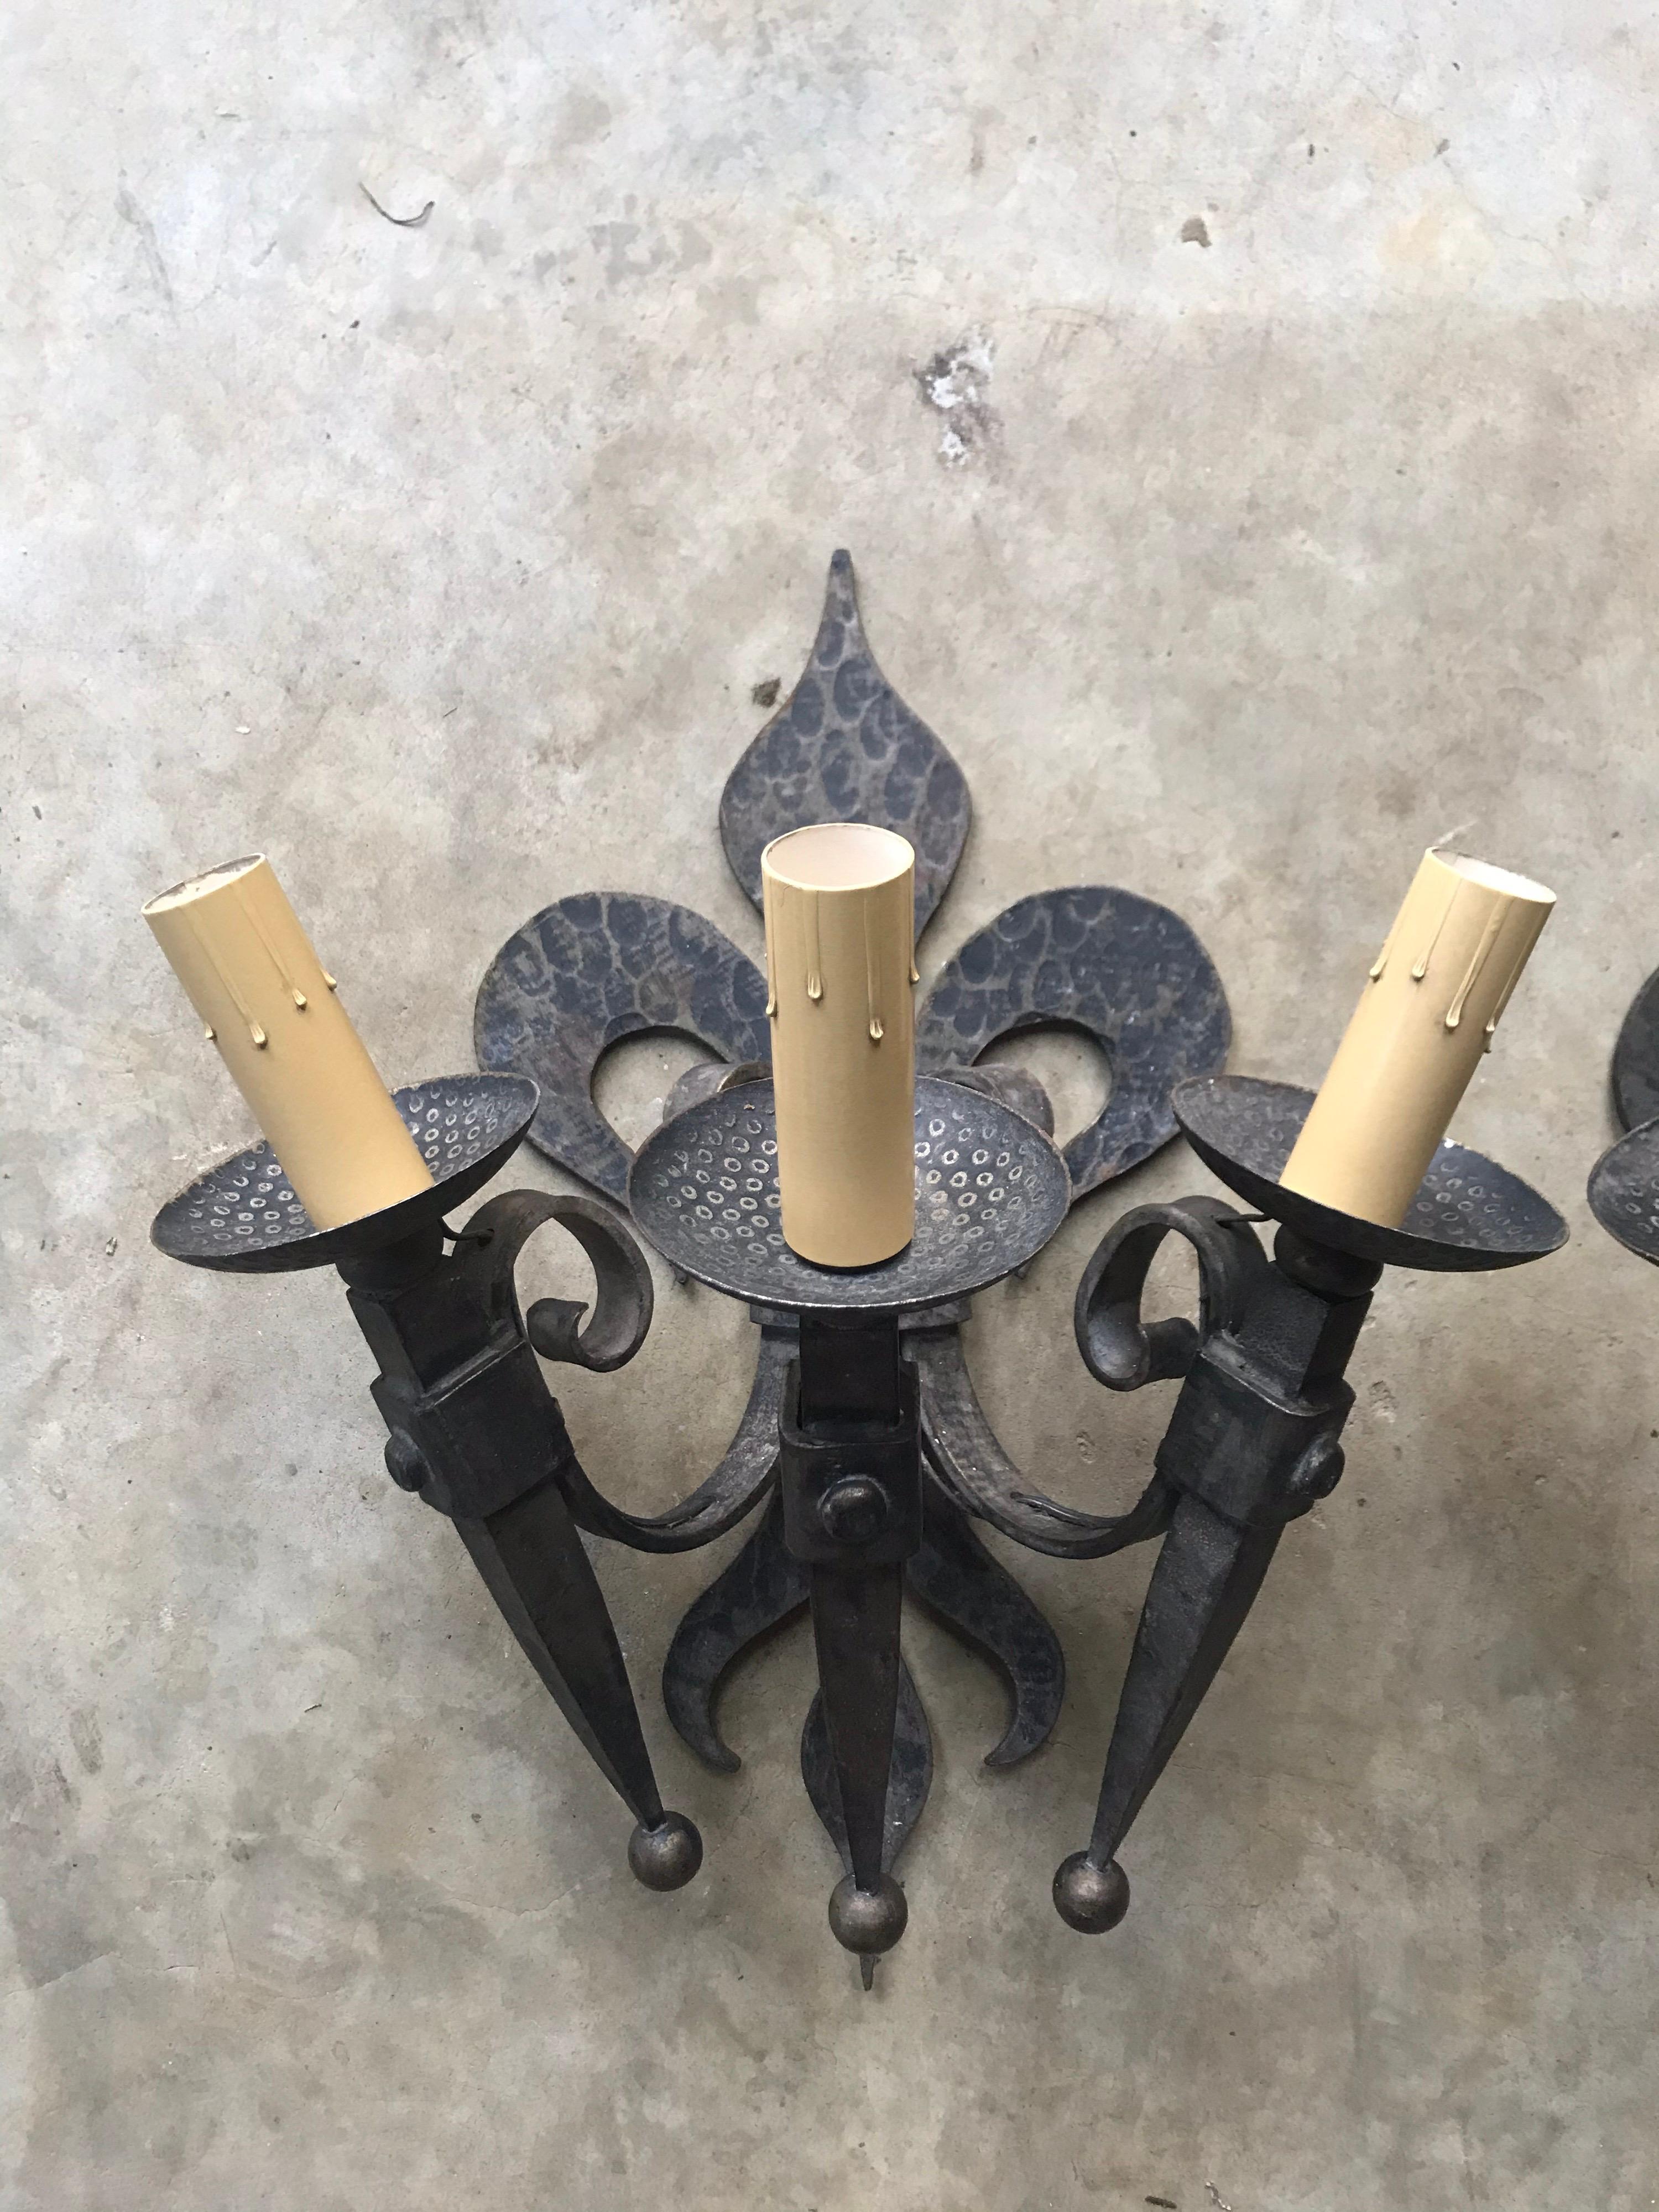 Pair of French iron 3-arm sconces. Made of heavy wrought iron, these impressive sconces feature a hammered fleur-de-lys back with 3 attached arms. These sconces have a gothic/chateau feel to them and provide lots of light with 40 watt bulbs for each